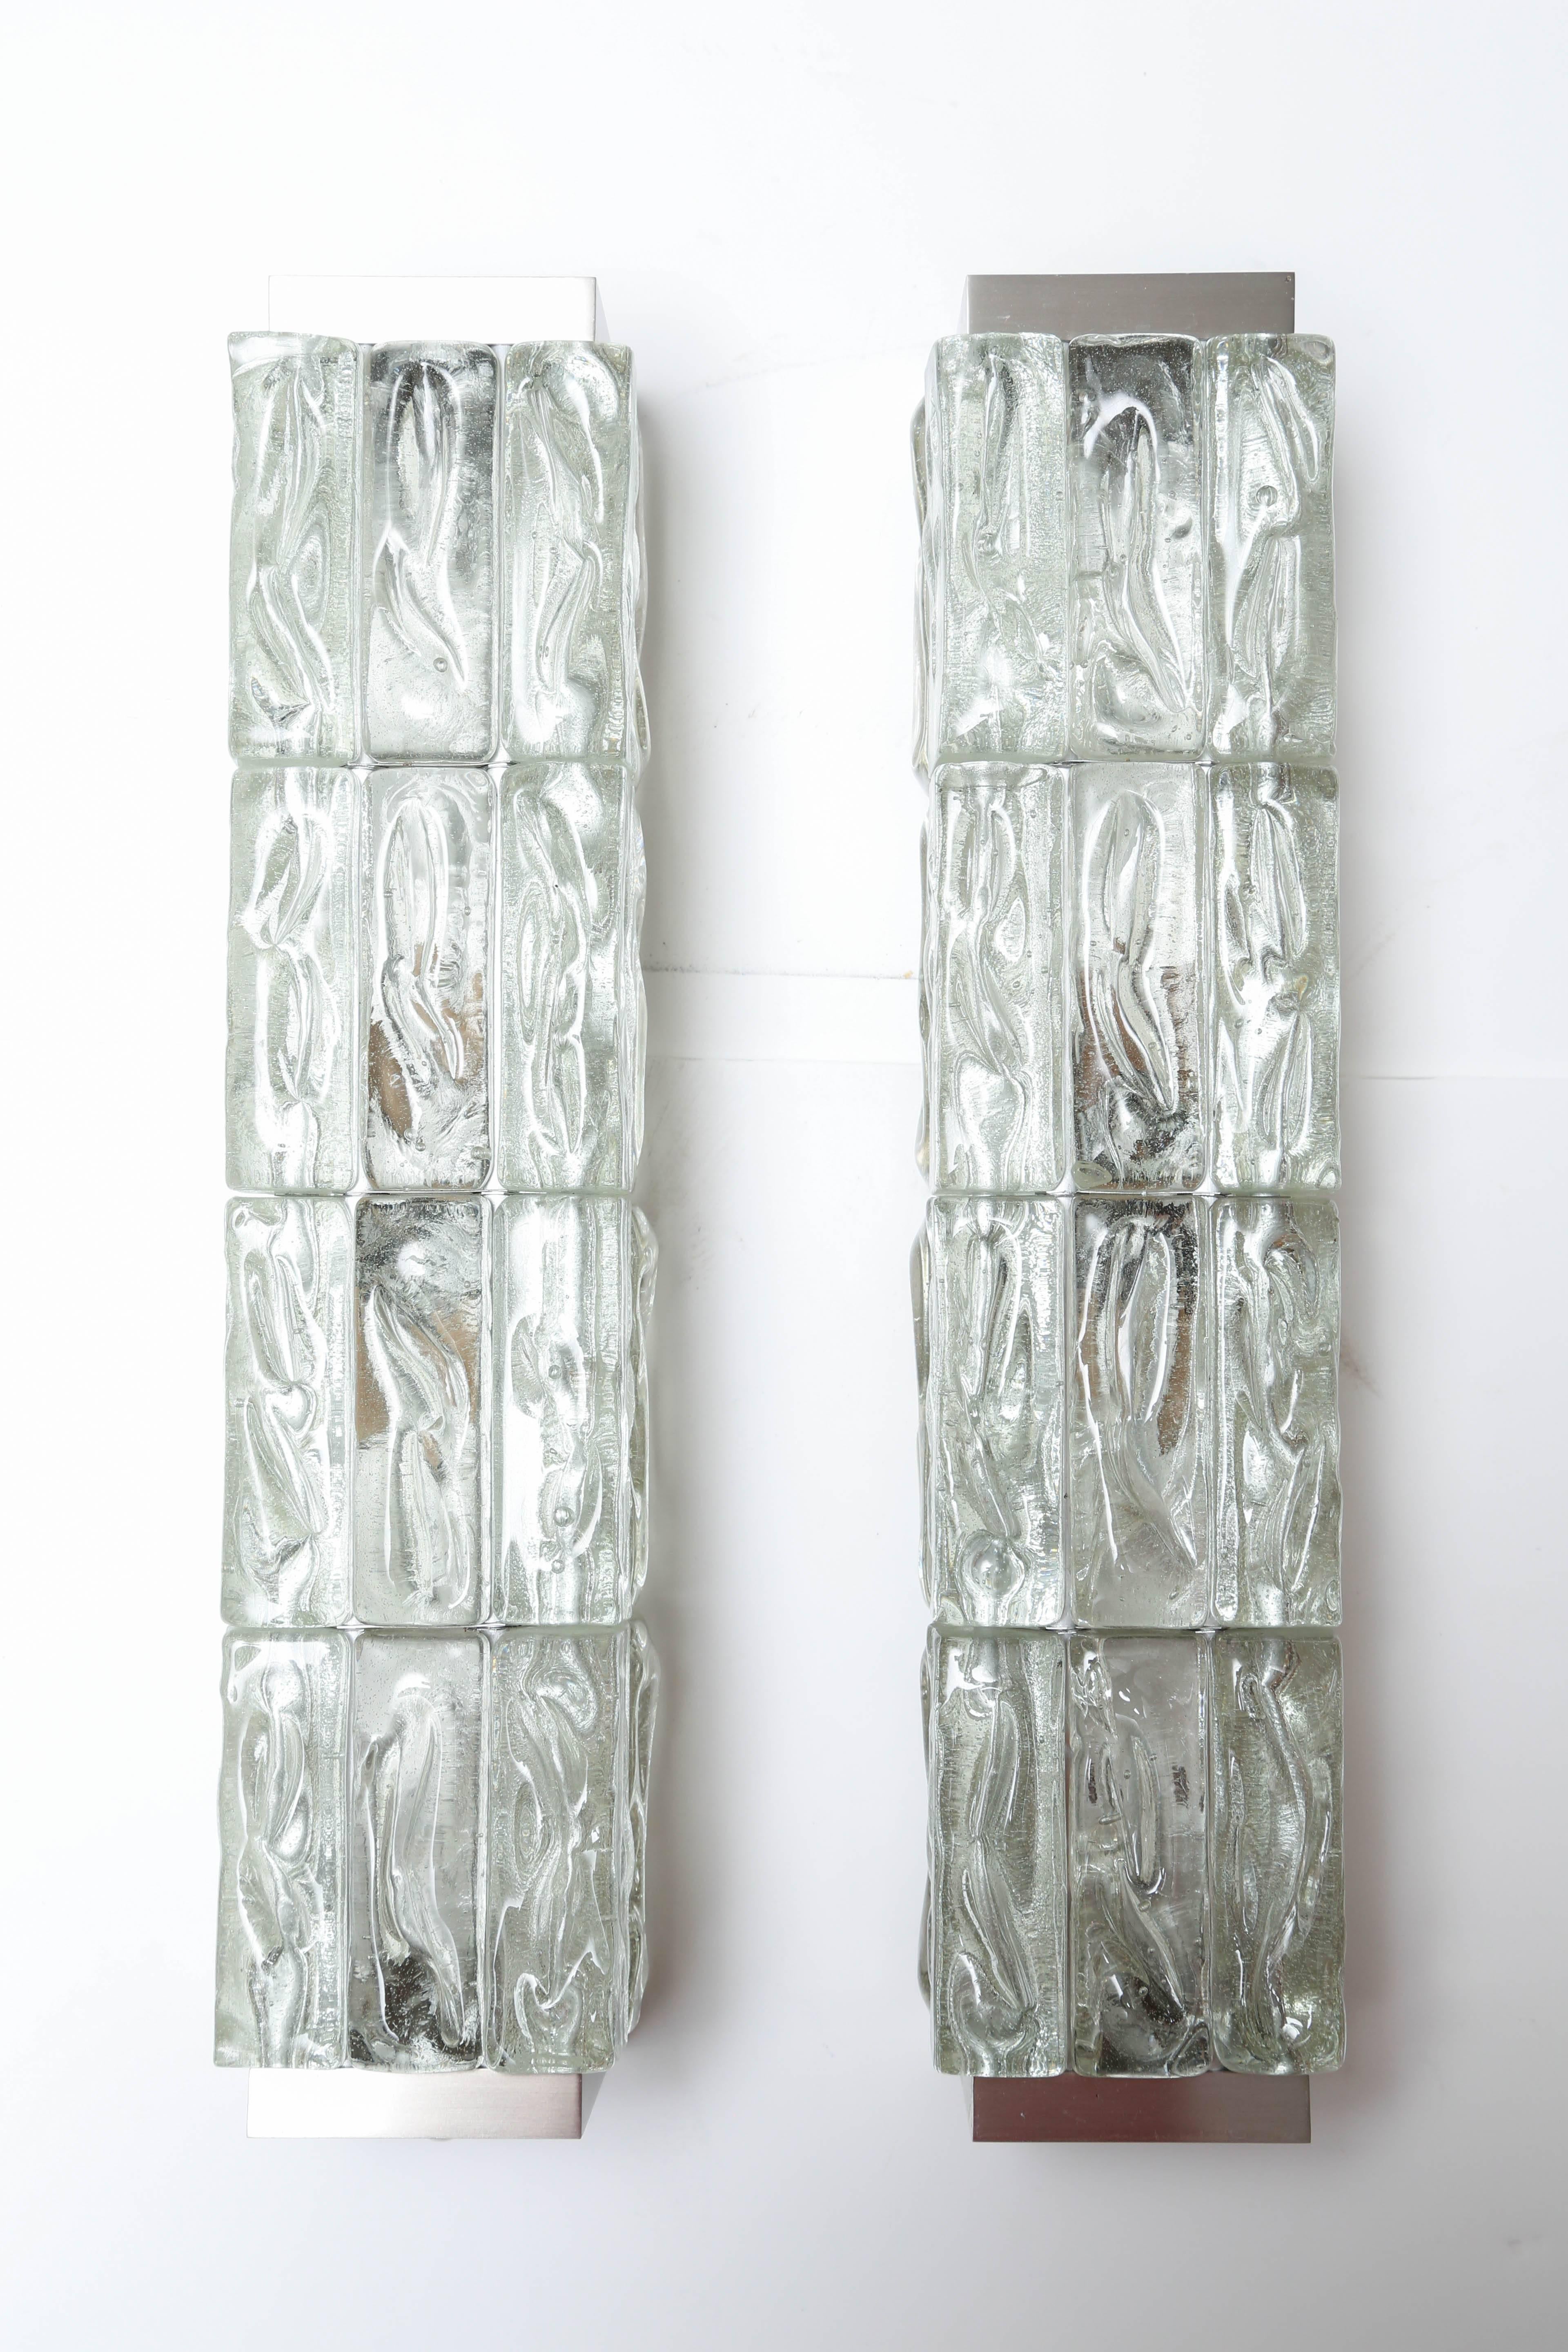 Fabulous Art Deco style form by the iconic Parisian designer.
A generously scaled and dramatic signed pair.